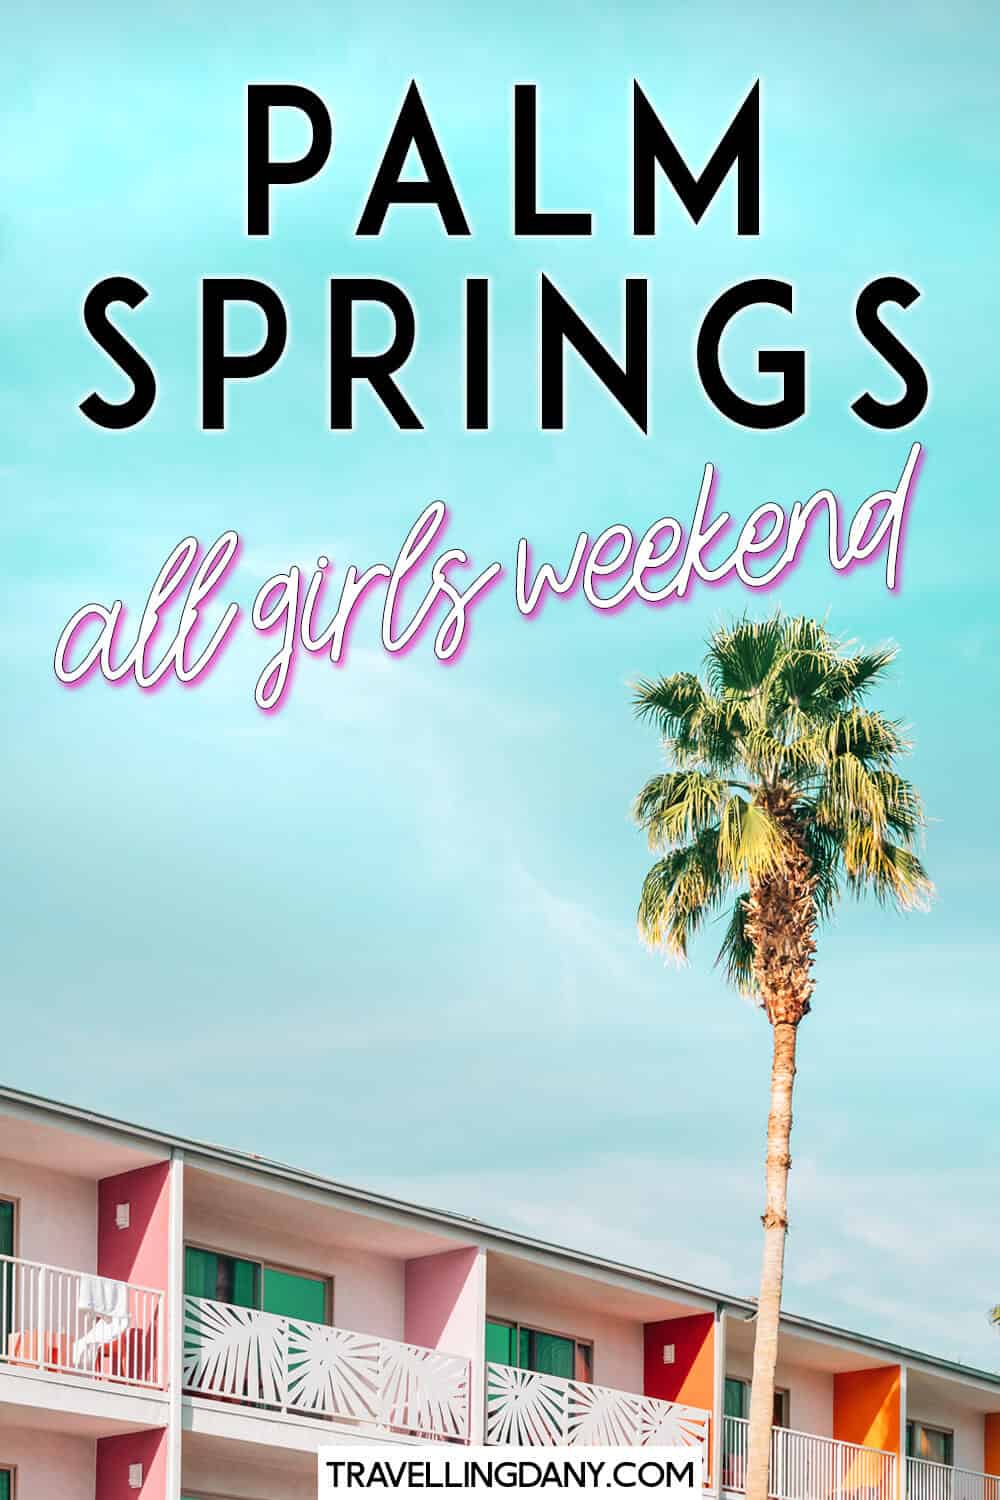 Are you planning a fab Palm Springs weekend with your besties and you’re looking for inspiration? Check out this fun and chill Palm Springs itinerary for a girls trip! With tons of ideas, free things to do and useful tips!